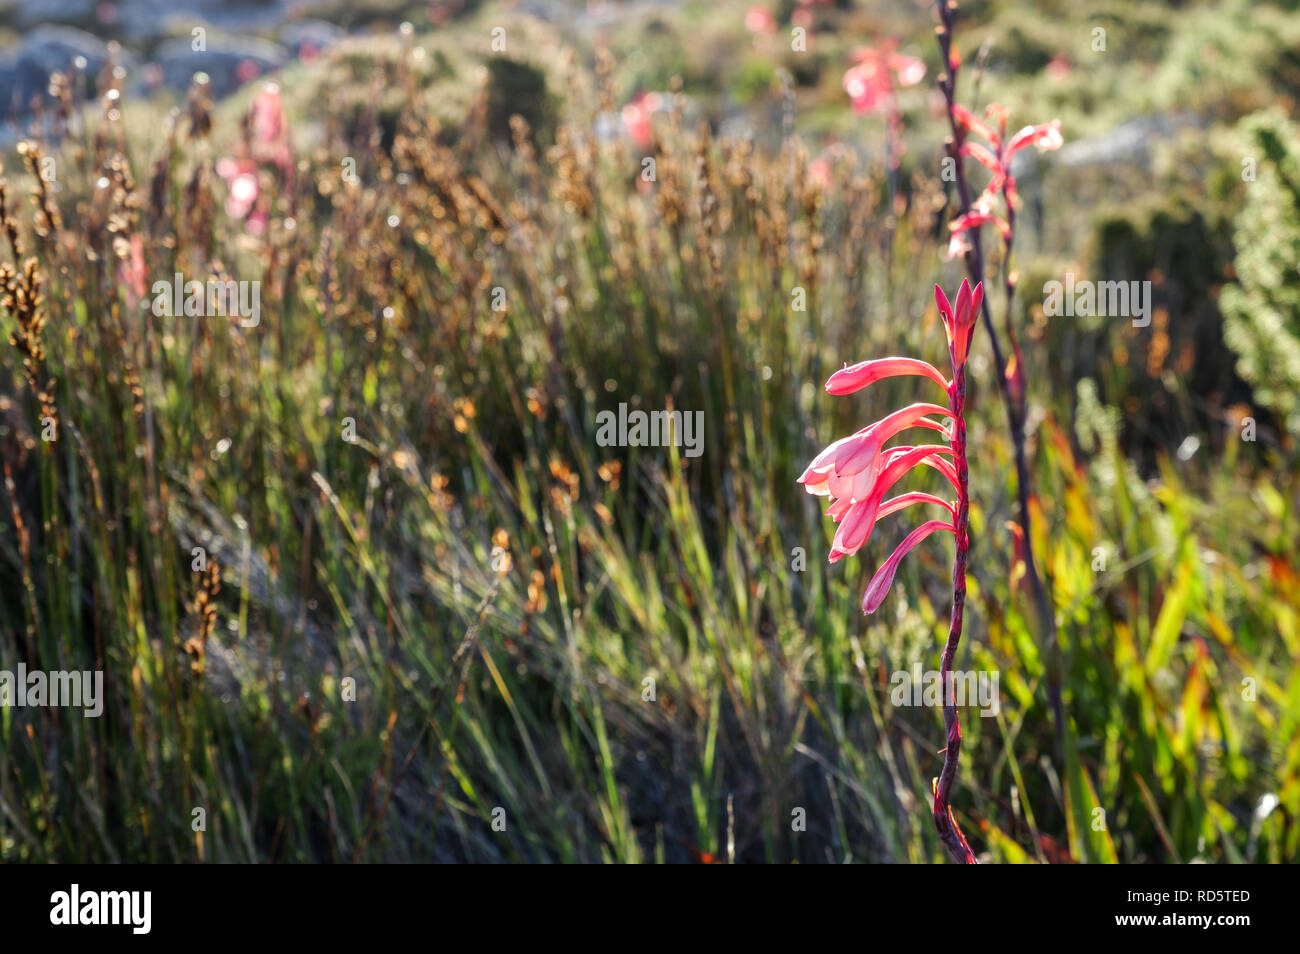 Watsonia Tabularis flowering on top of the Table Mountain in Cape Town, South Africa Stock Photo